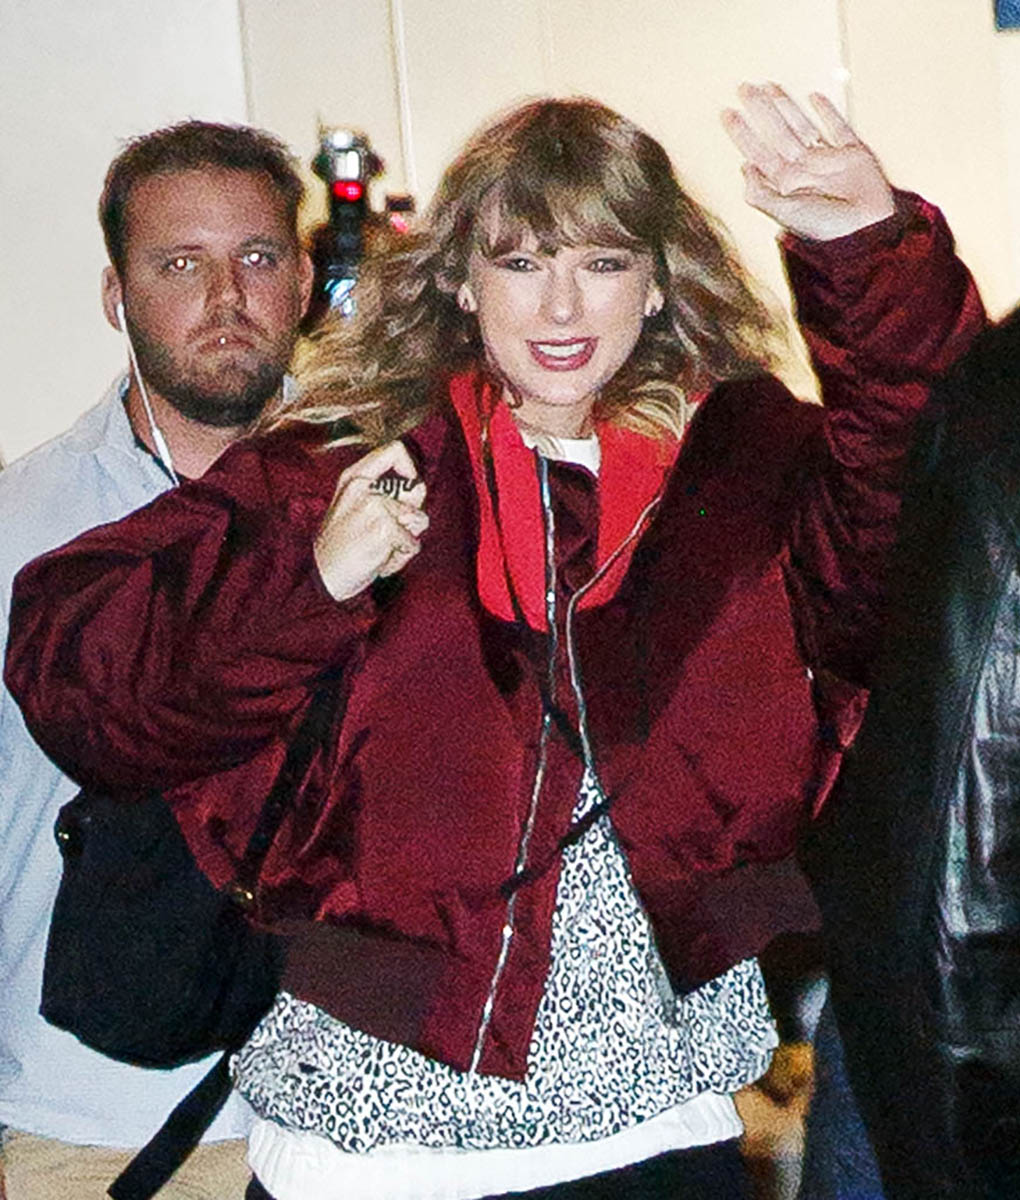 Taylor Swift waves at her fans while wearing a snake ring on her right middle finger at her popup store in New York